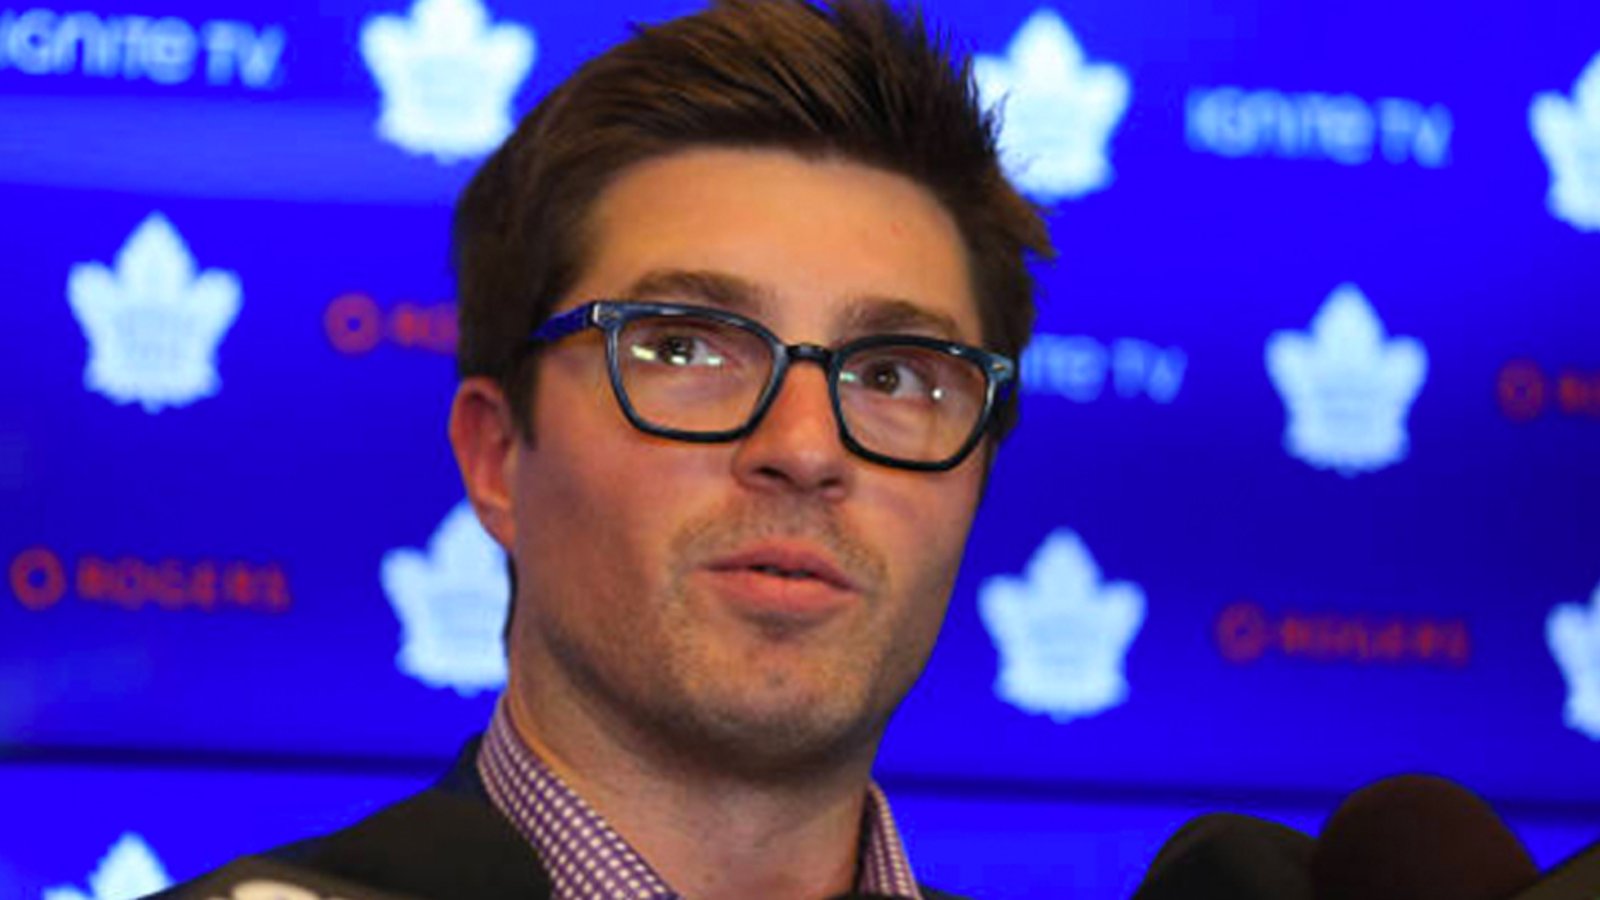 Kyle Dubas confirms big changes coming for the Leafs in 2021